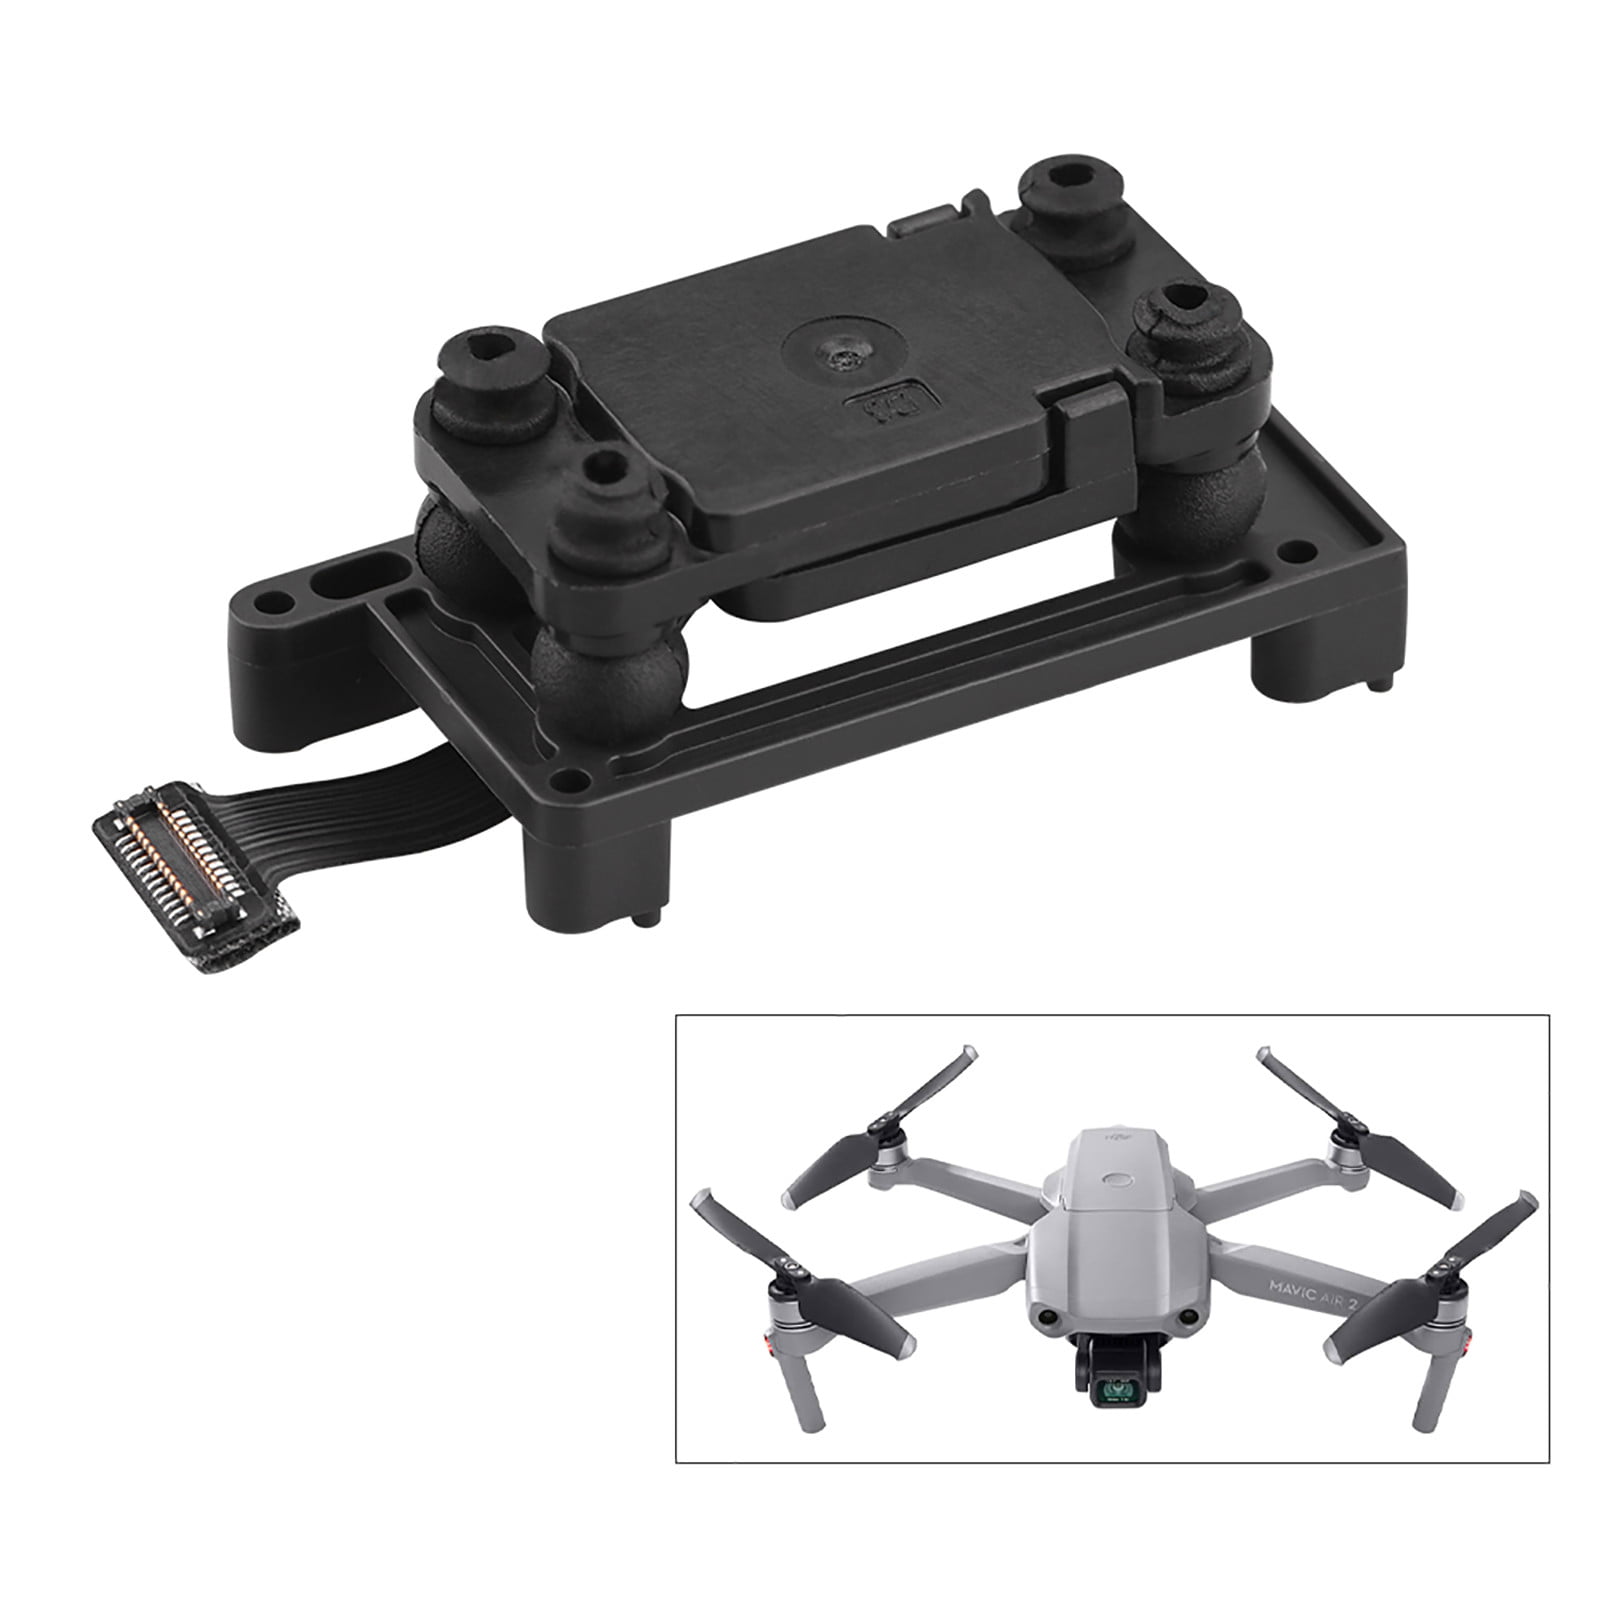 Ledningsevne Koge Telemacos Fonwoon Replacement Component IMU Module for DJI Mavic Air 2 Drone  Accessories Parts - Walmart.com